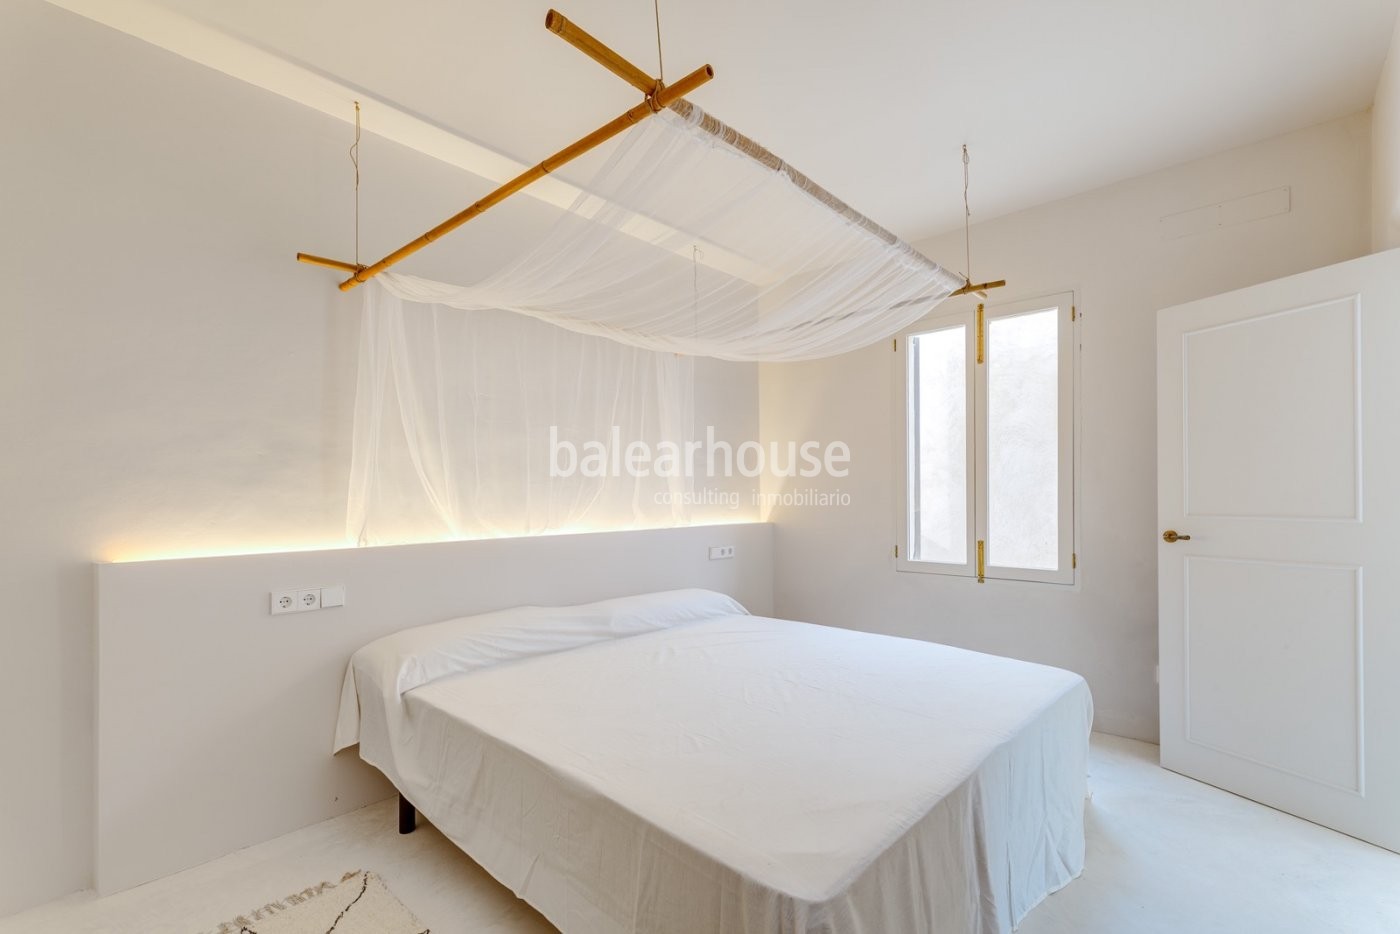 Excellent brand new house full of light and charm very close to the beaches and port of Cala Ratjada